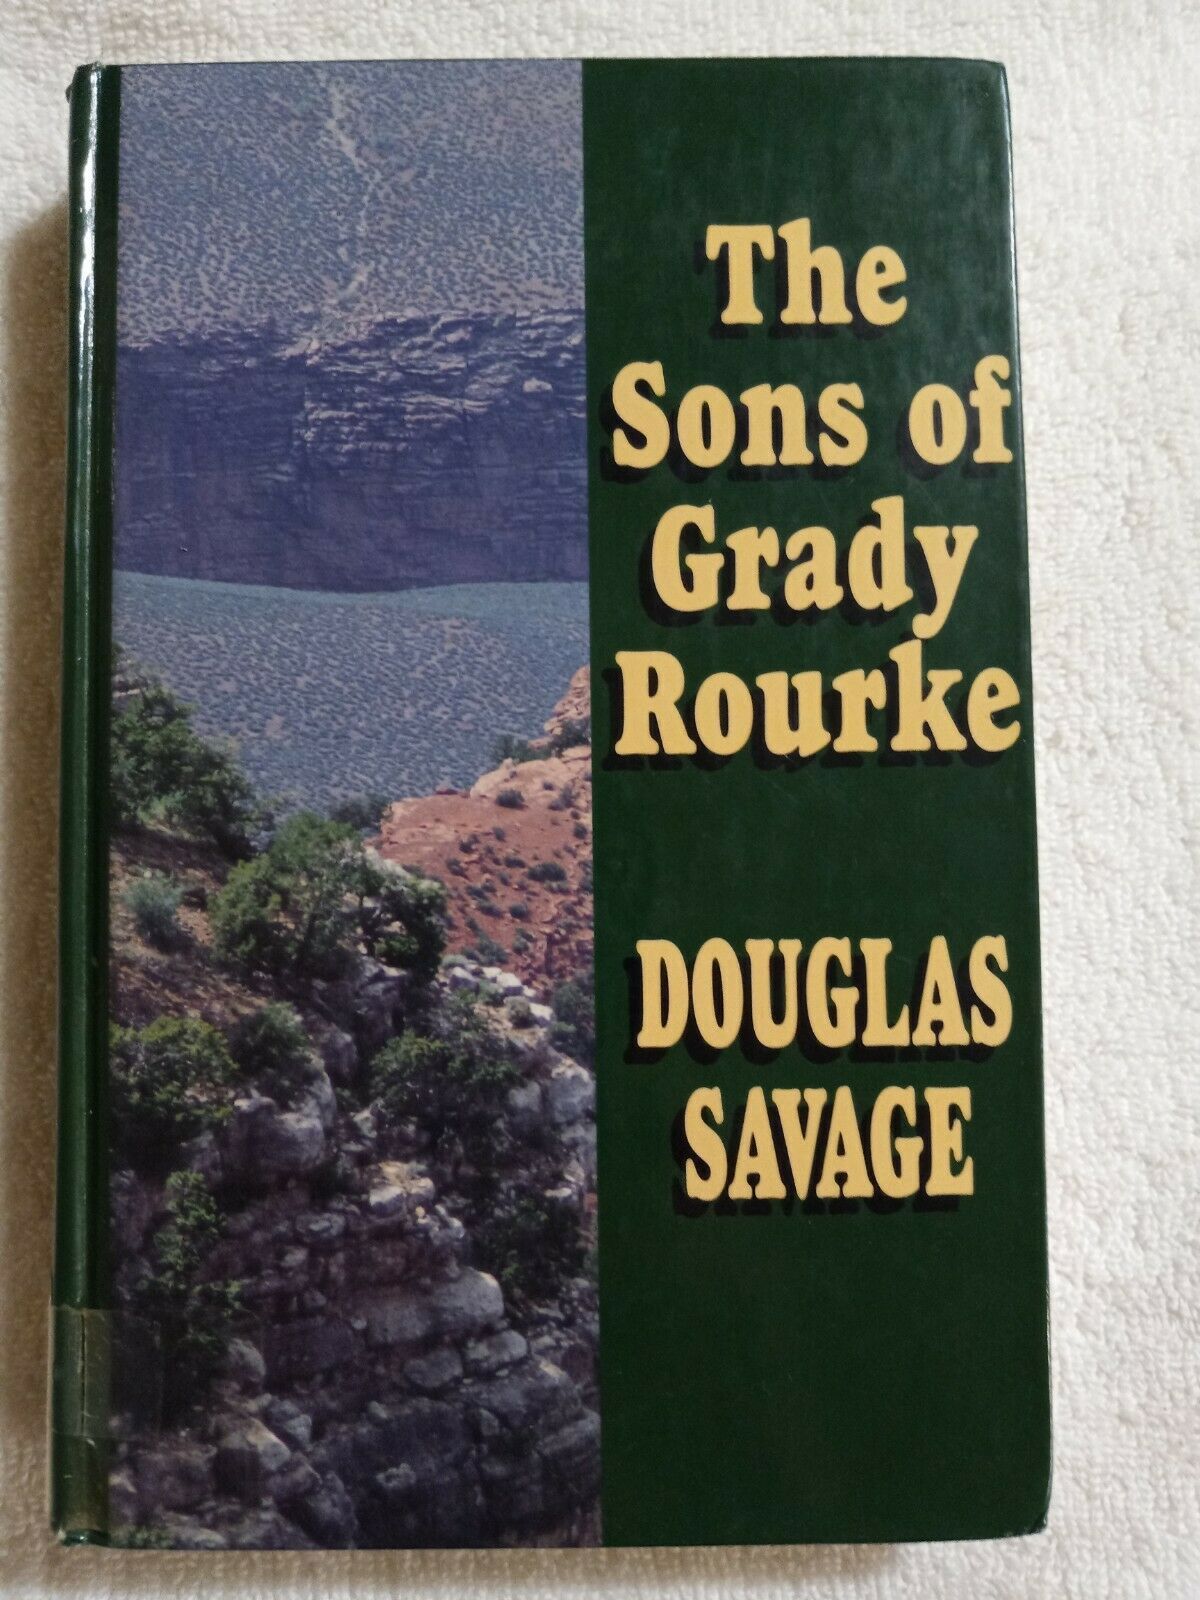 Primary image for The Sons of Grady Rourke by Douglas Savage (1996, Hardcover, Large Print)